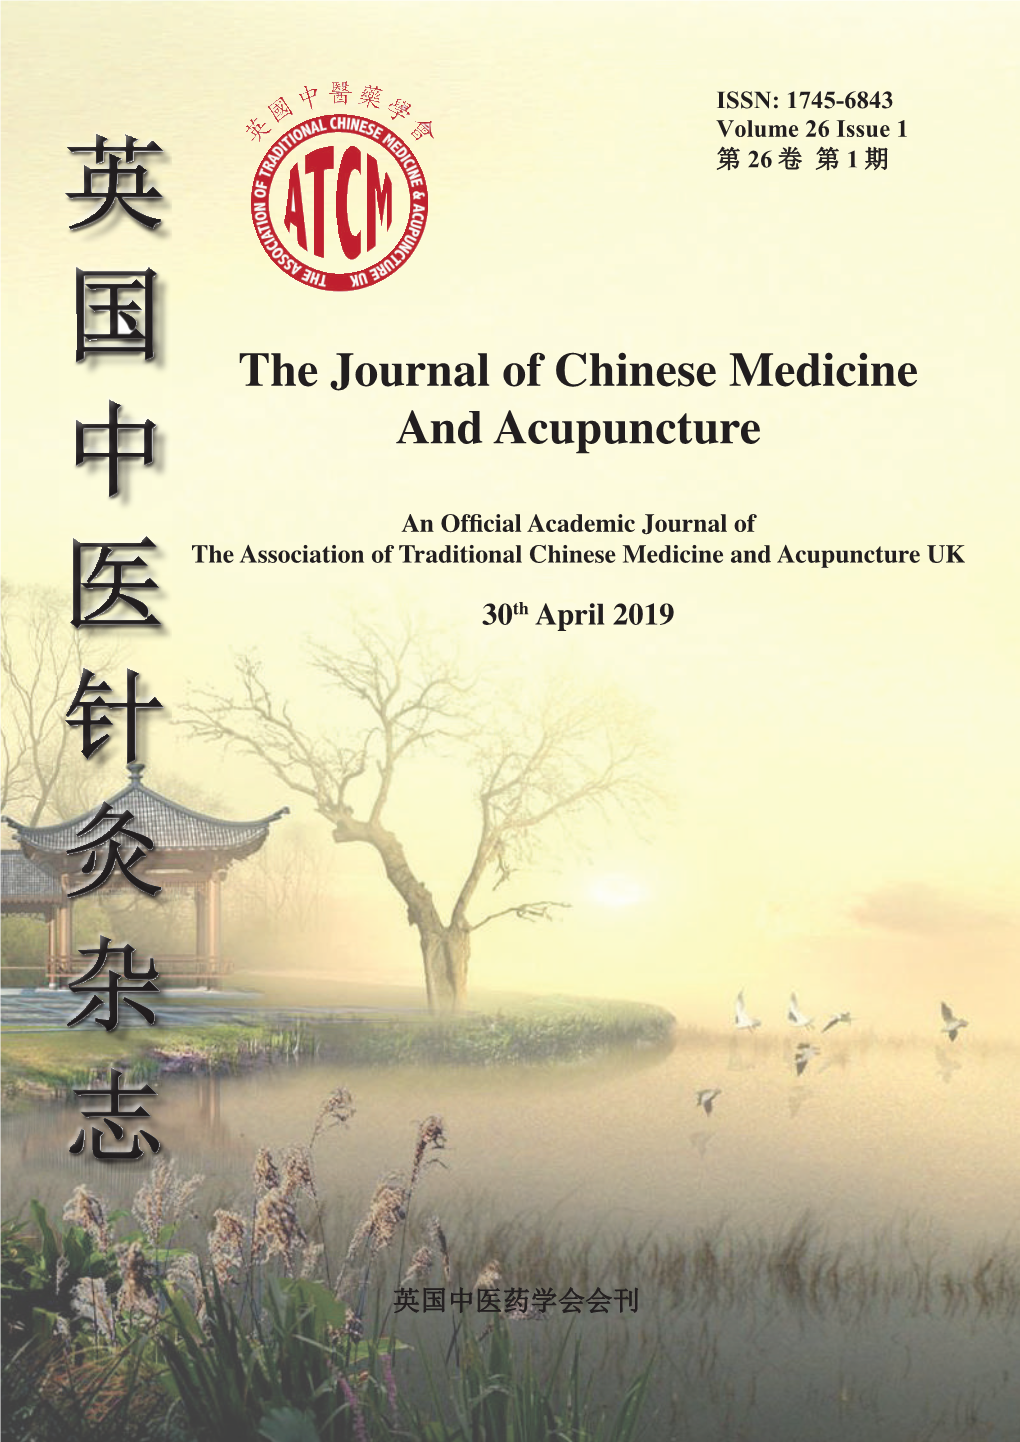 The Journal of Chinese Medicine and Acupuncture Volume 26 Issue 1 April 2019